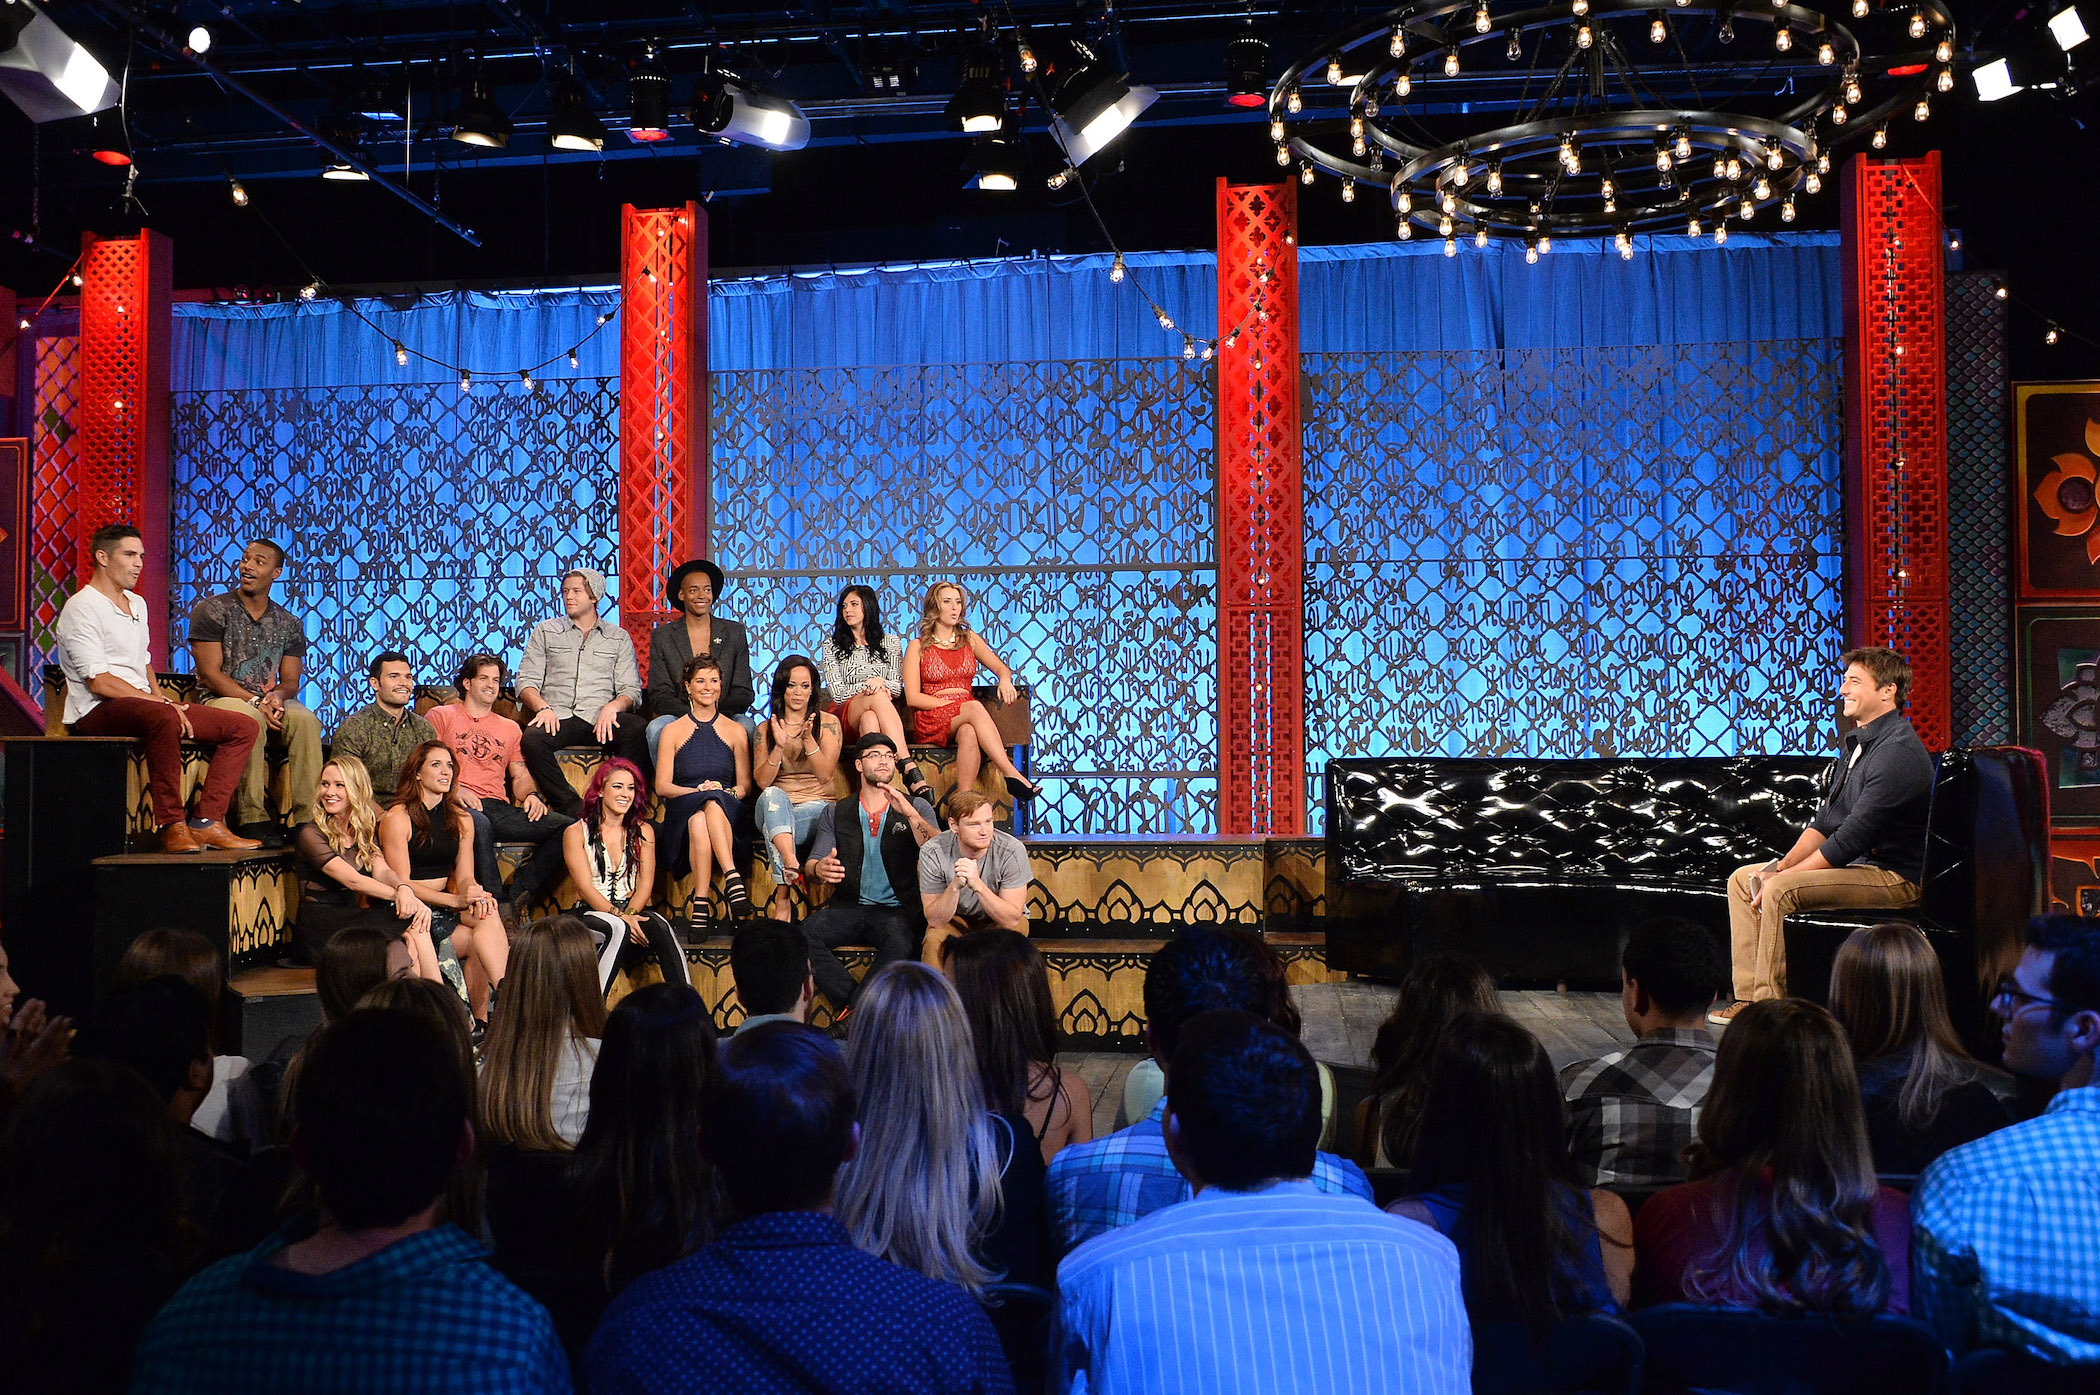 A wide shot of the cast of MTV's 'The Challenge: Rivals II' with castmates from 'The Real World' and 'Road Rules' sitting together for the final episode and reunion party 